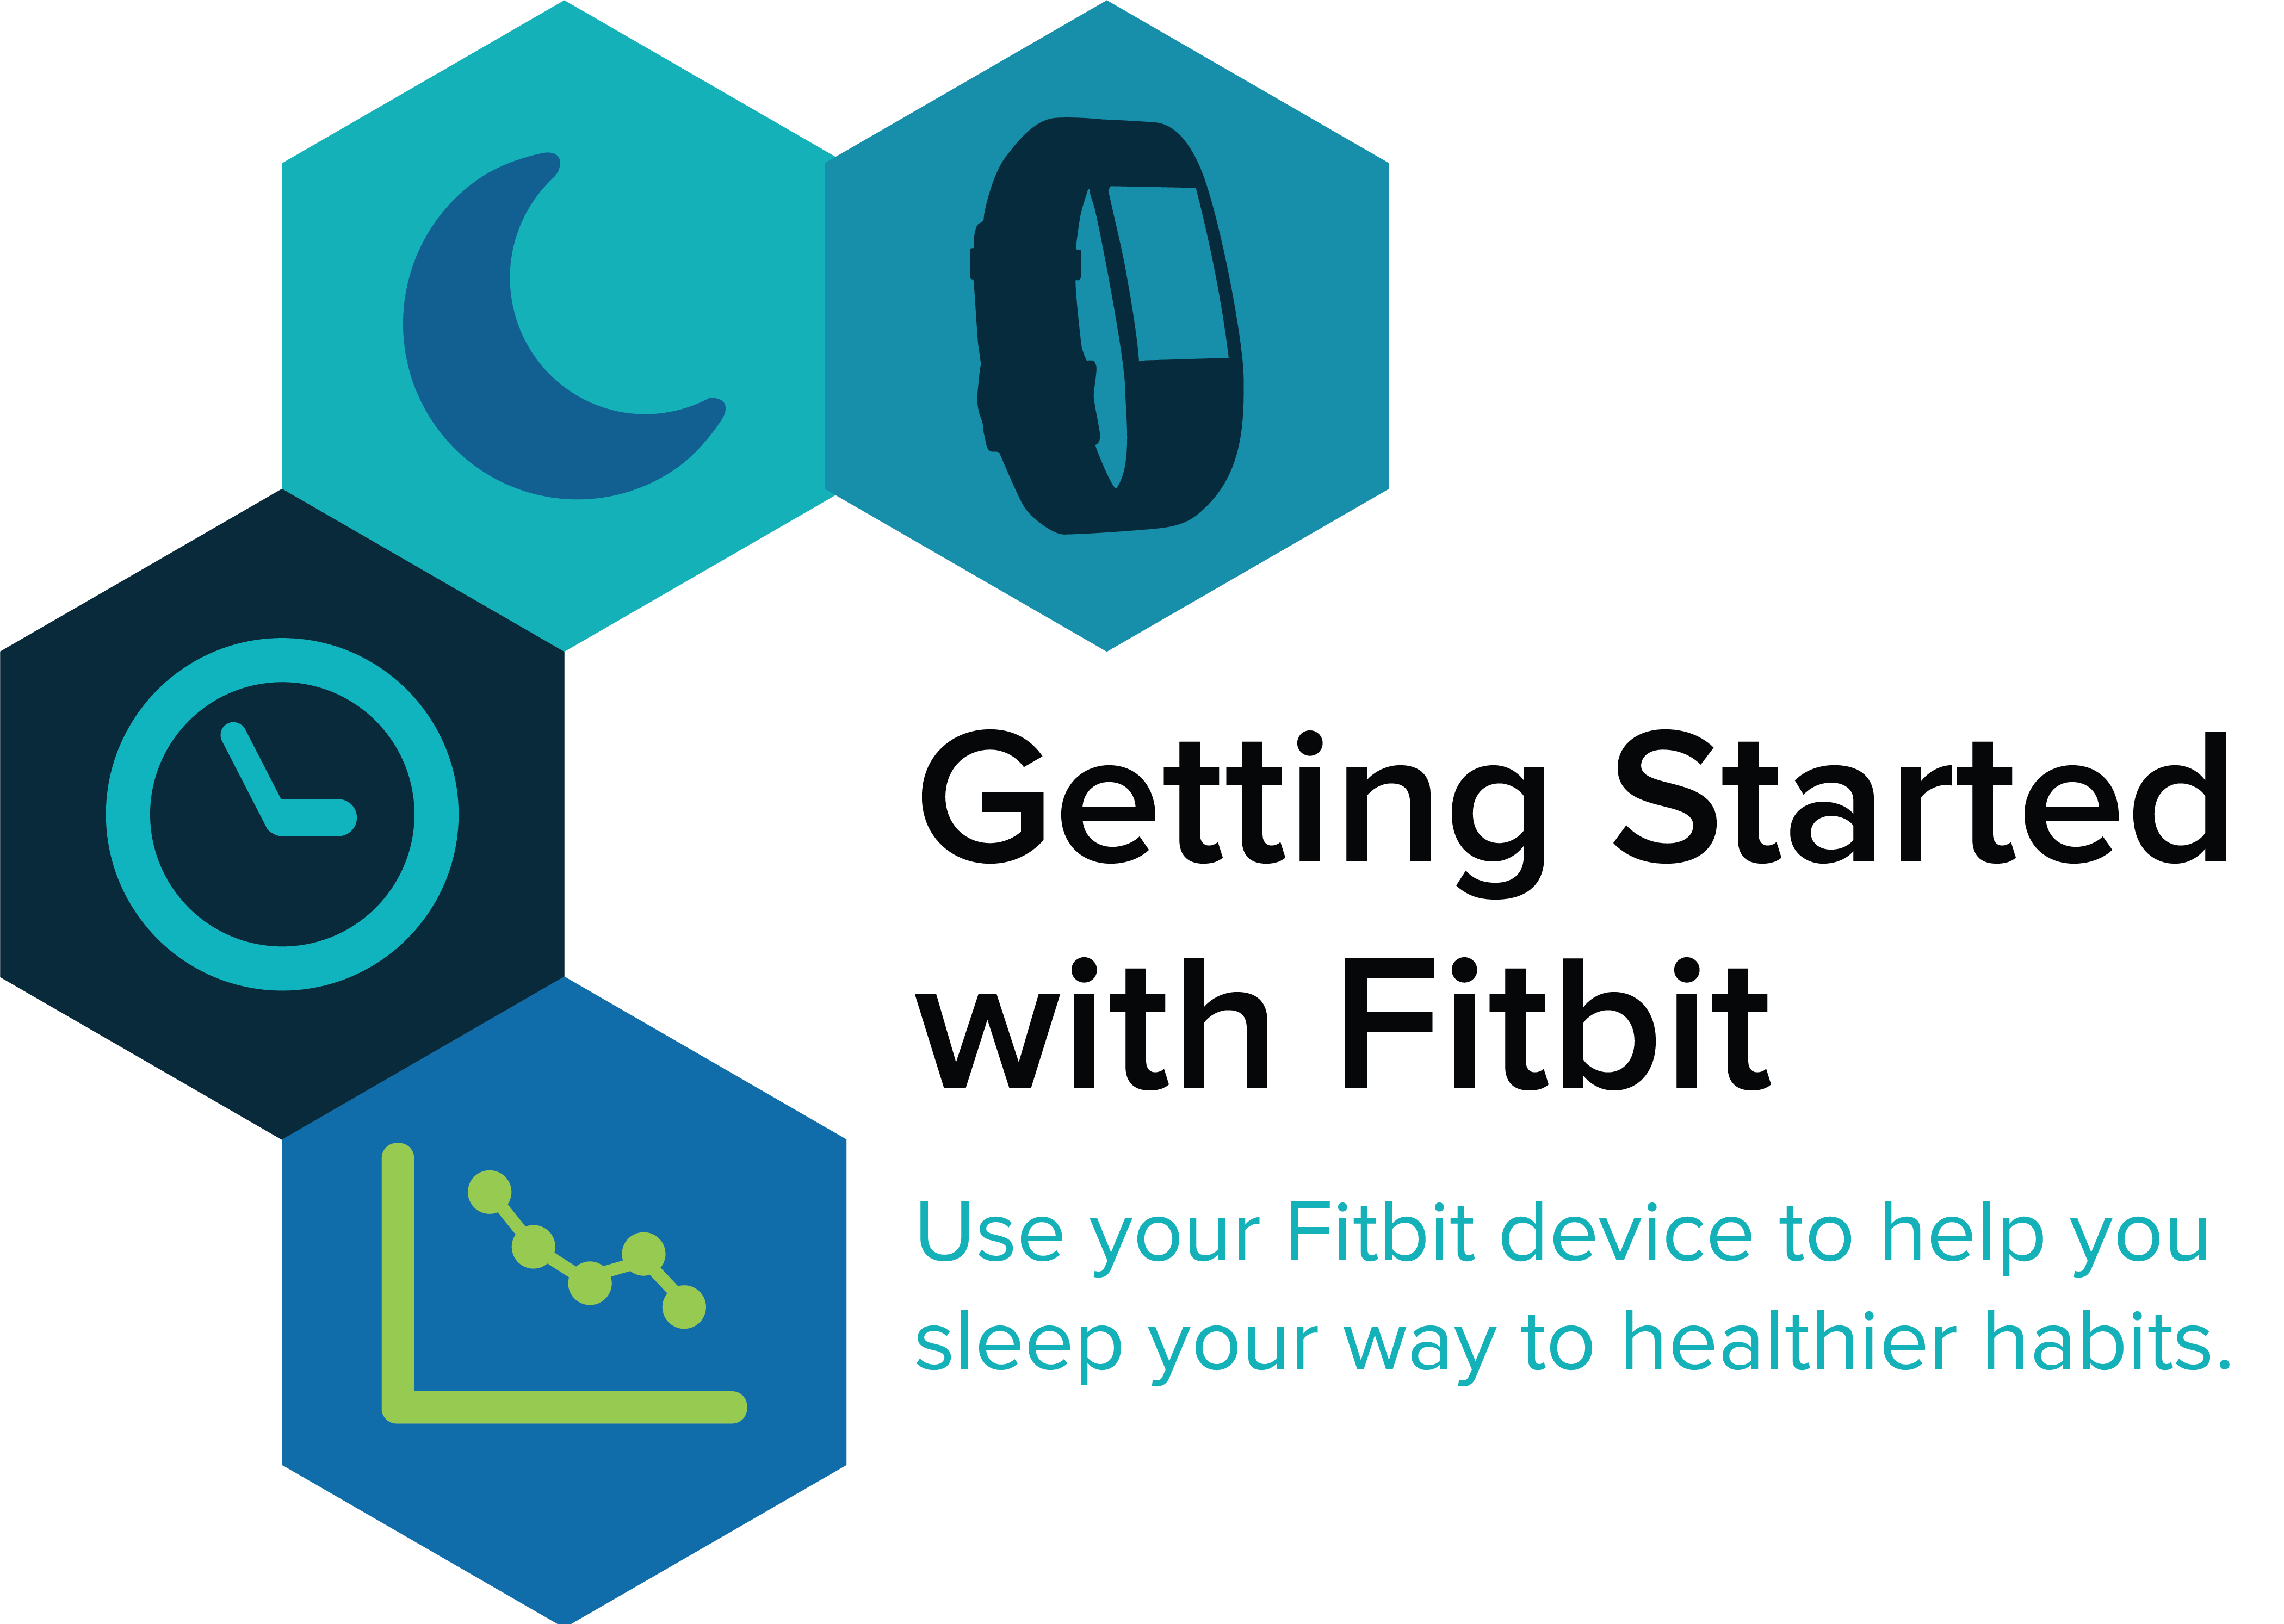 How can I use my Fitbit device to sleep better?